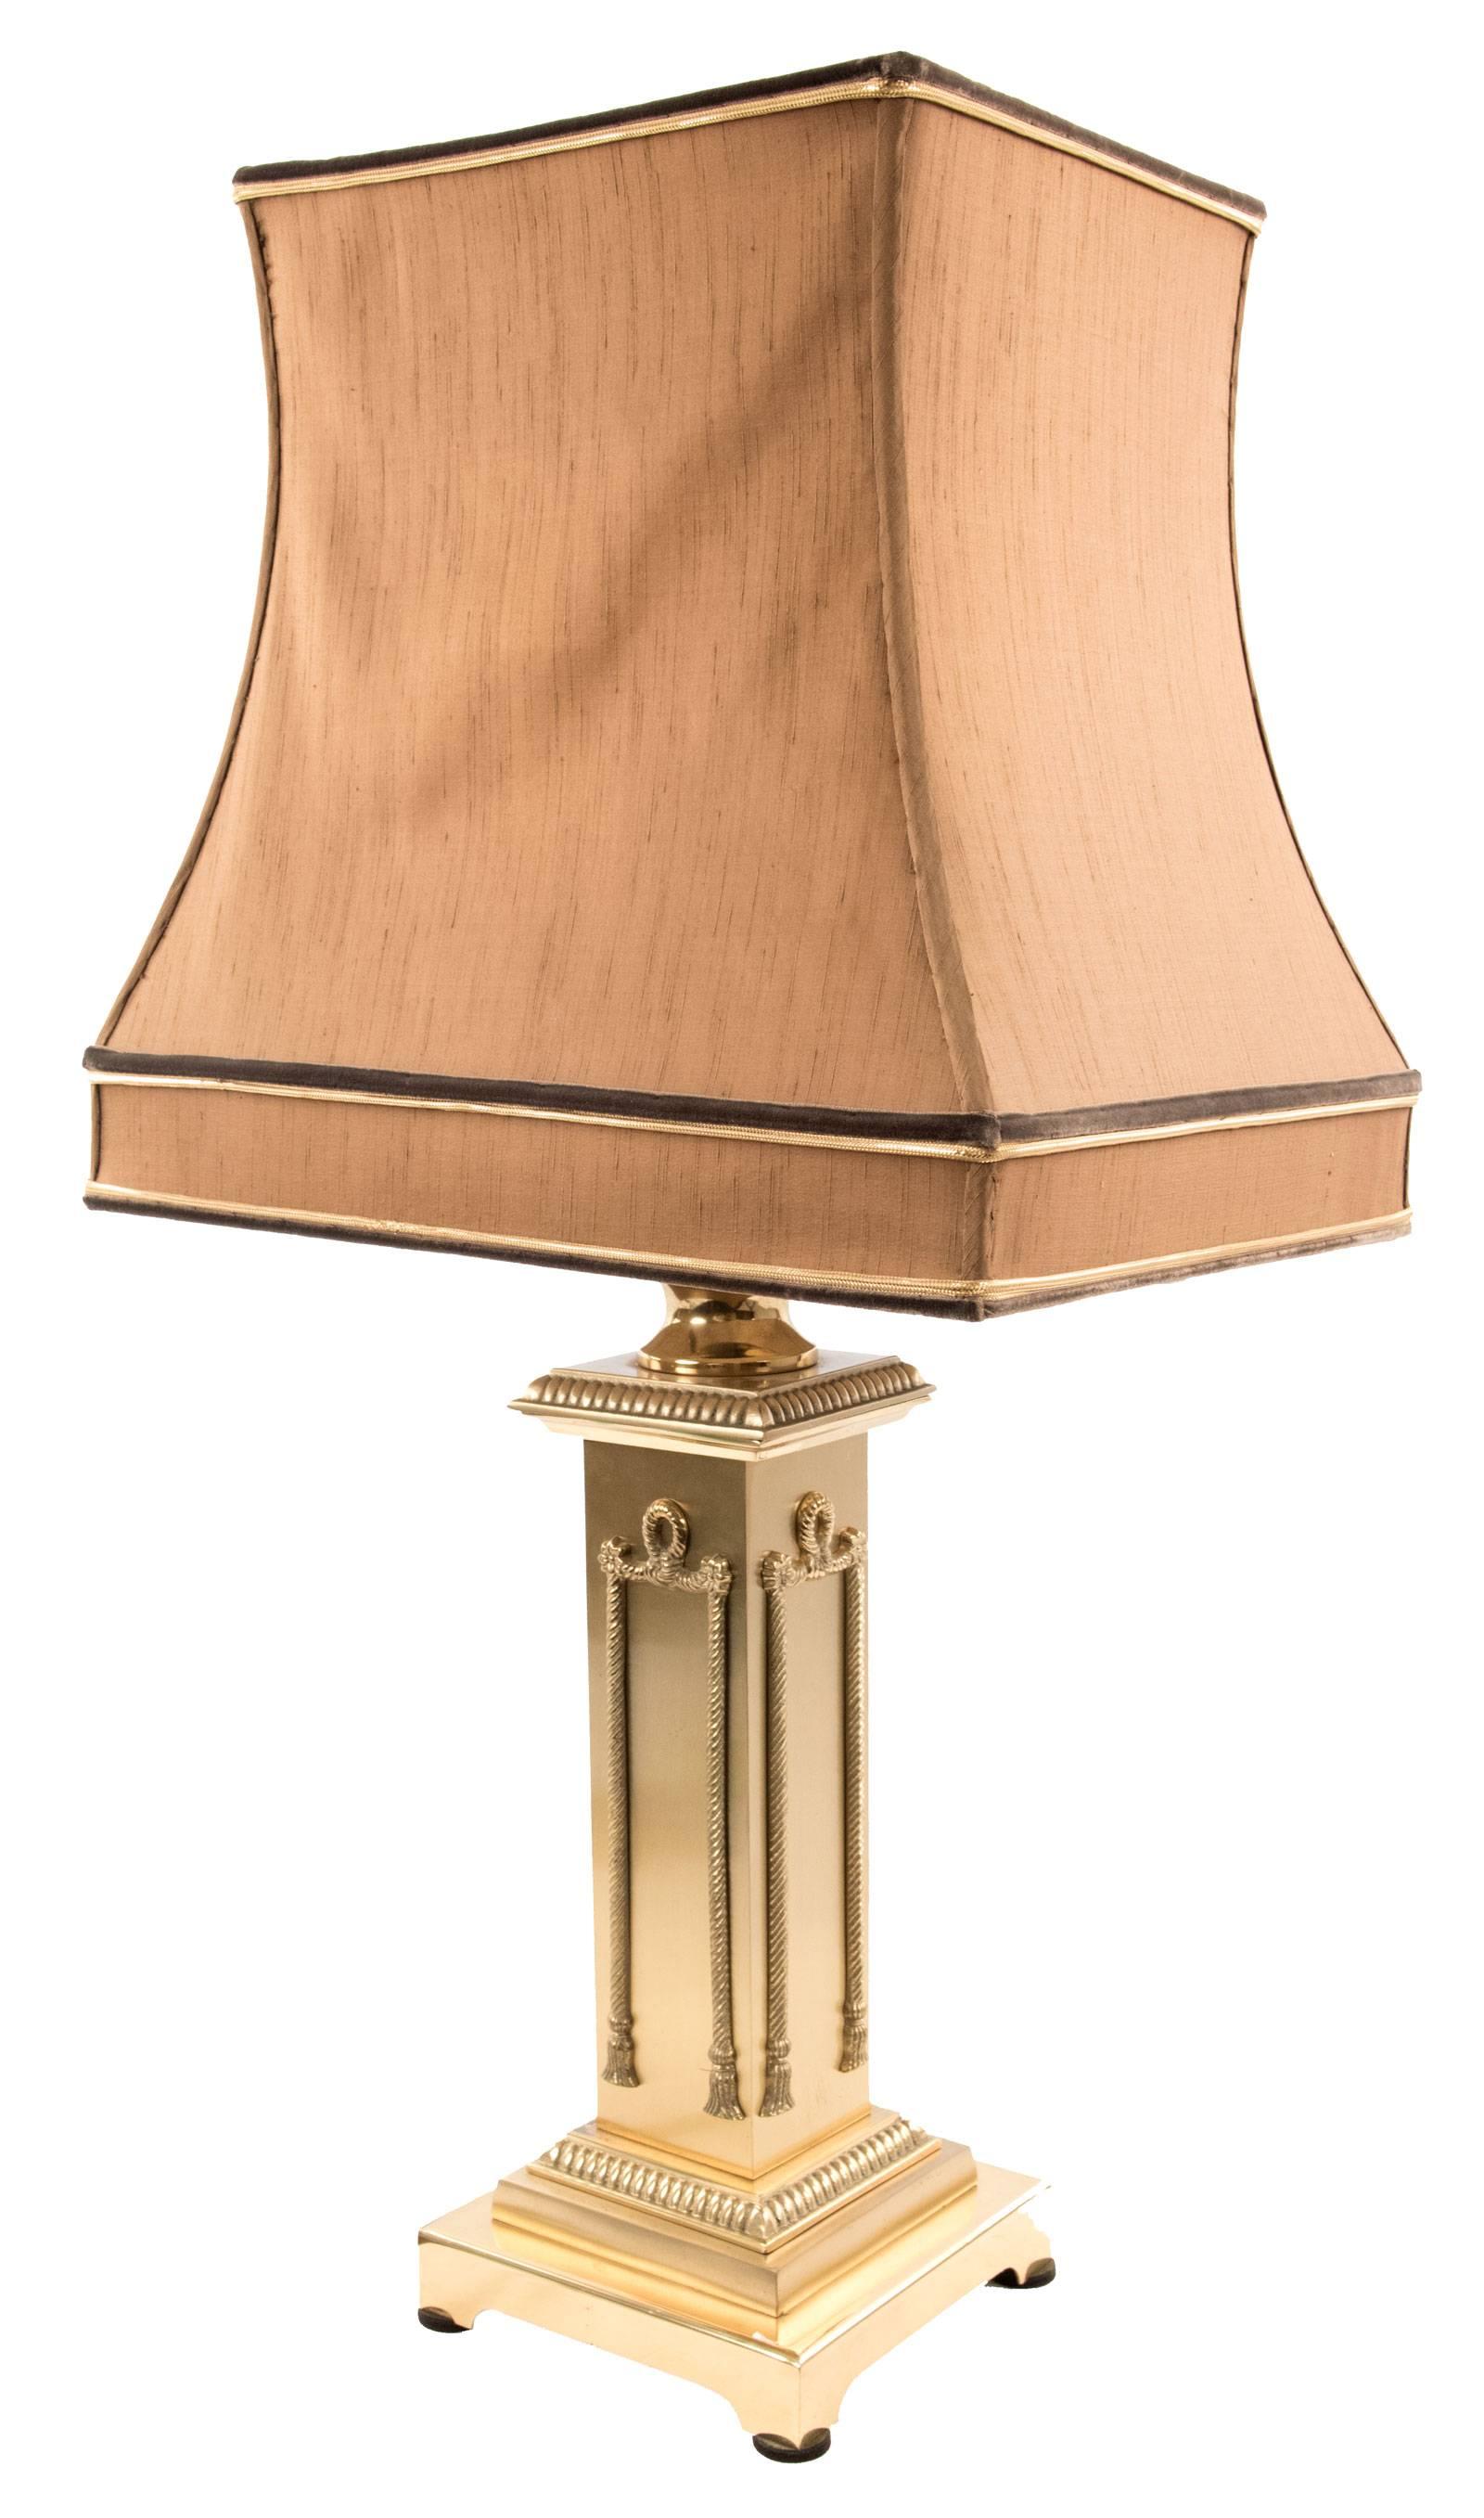 Neoclassical Revival Neoclassical Style Gold-Plated Table Lamp